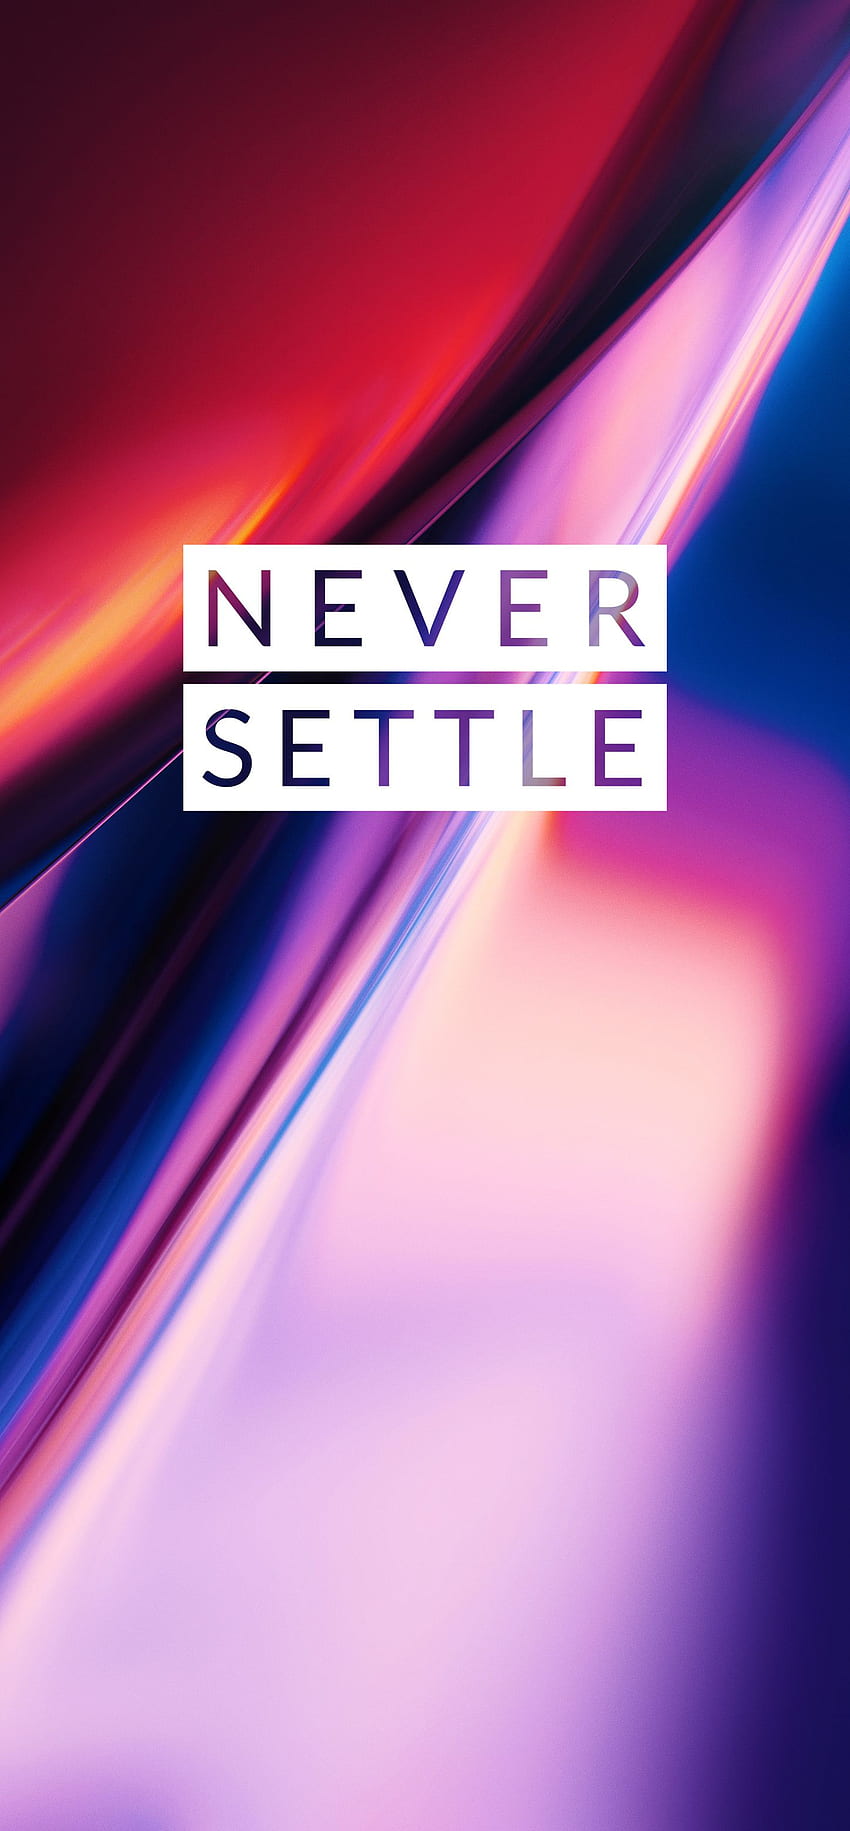 Download the new OnePlus 8T live wallpapers on any Android device